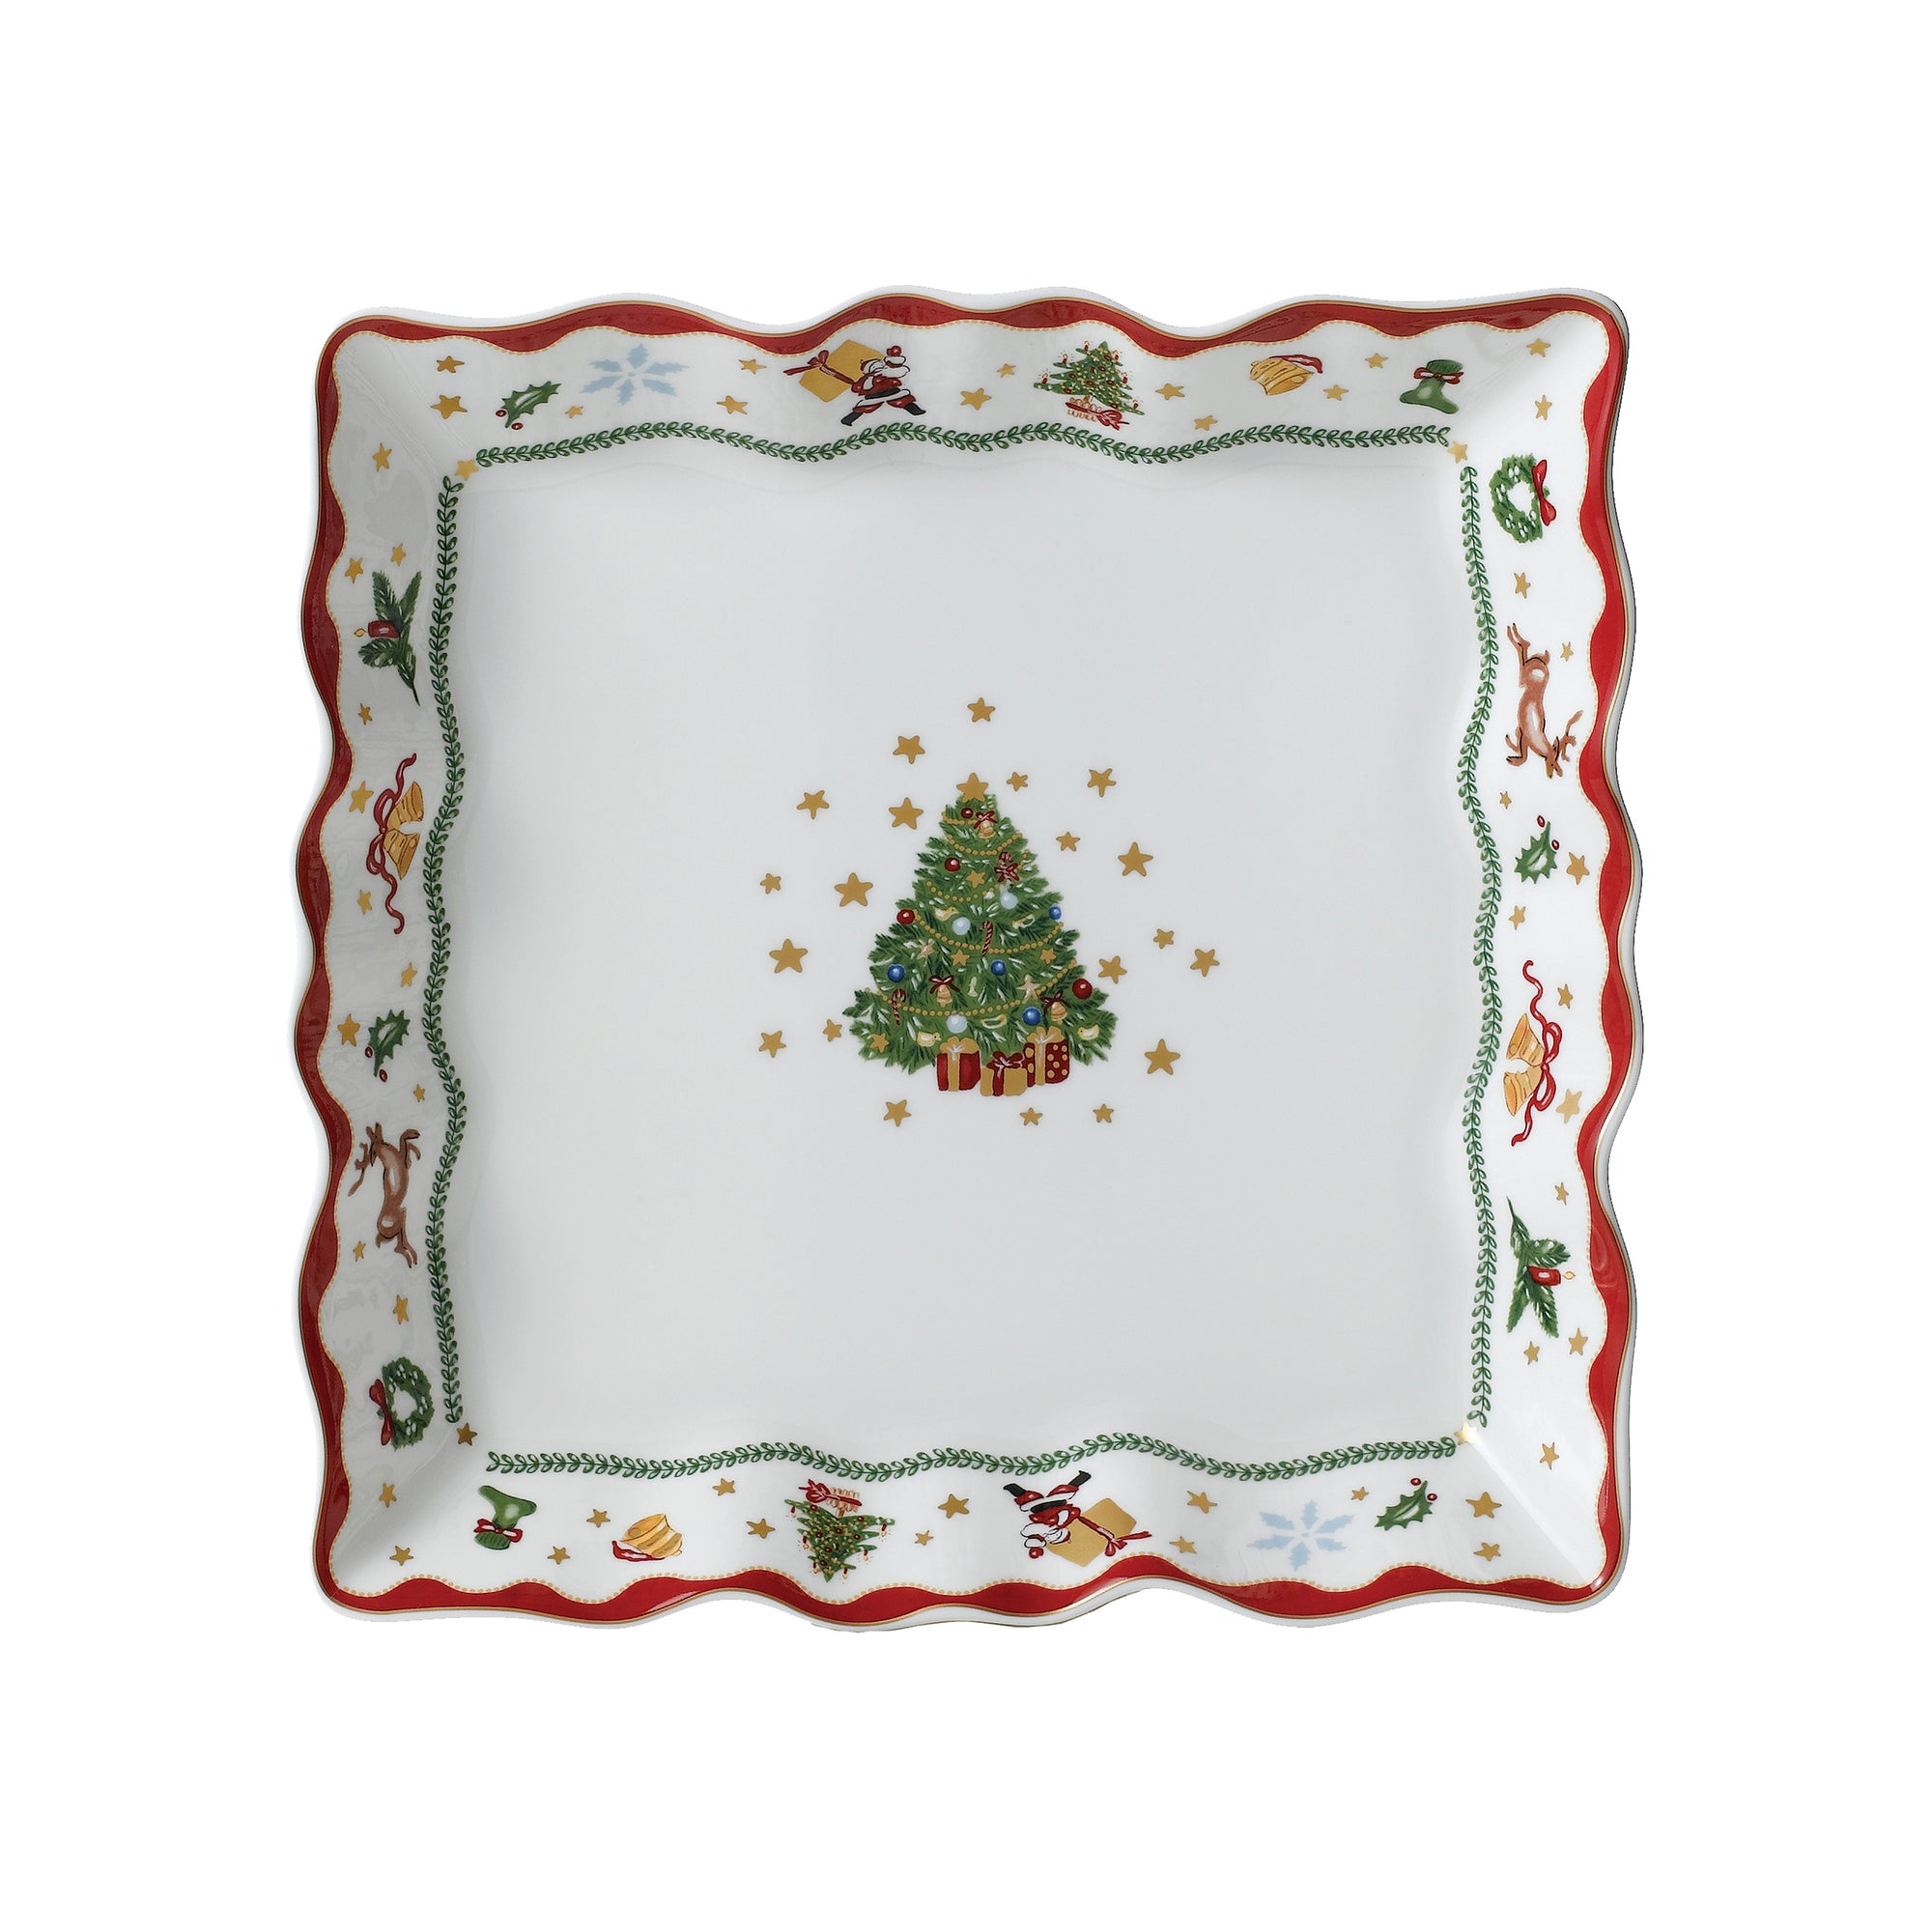 My Noel 9" Lace Square Tray White Background Photo